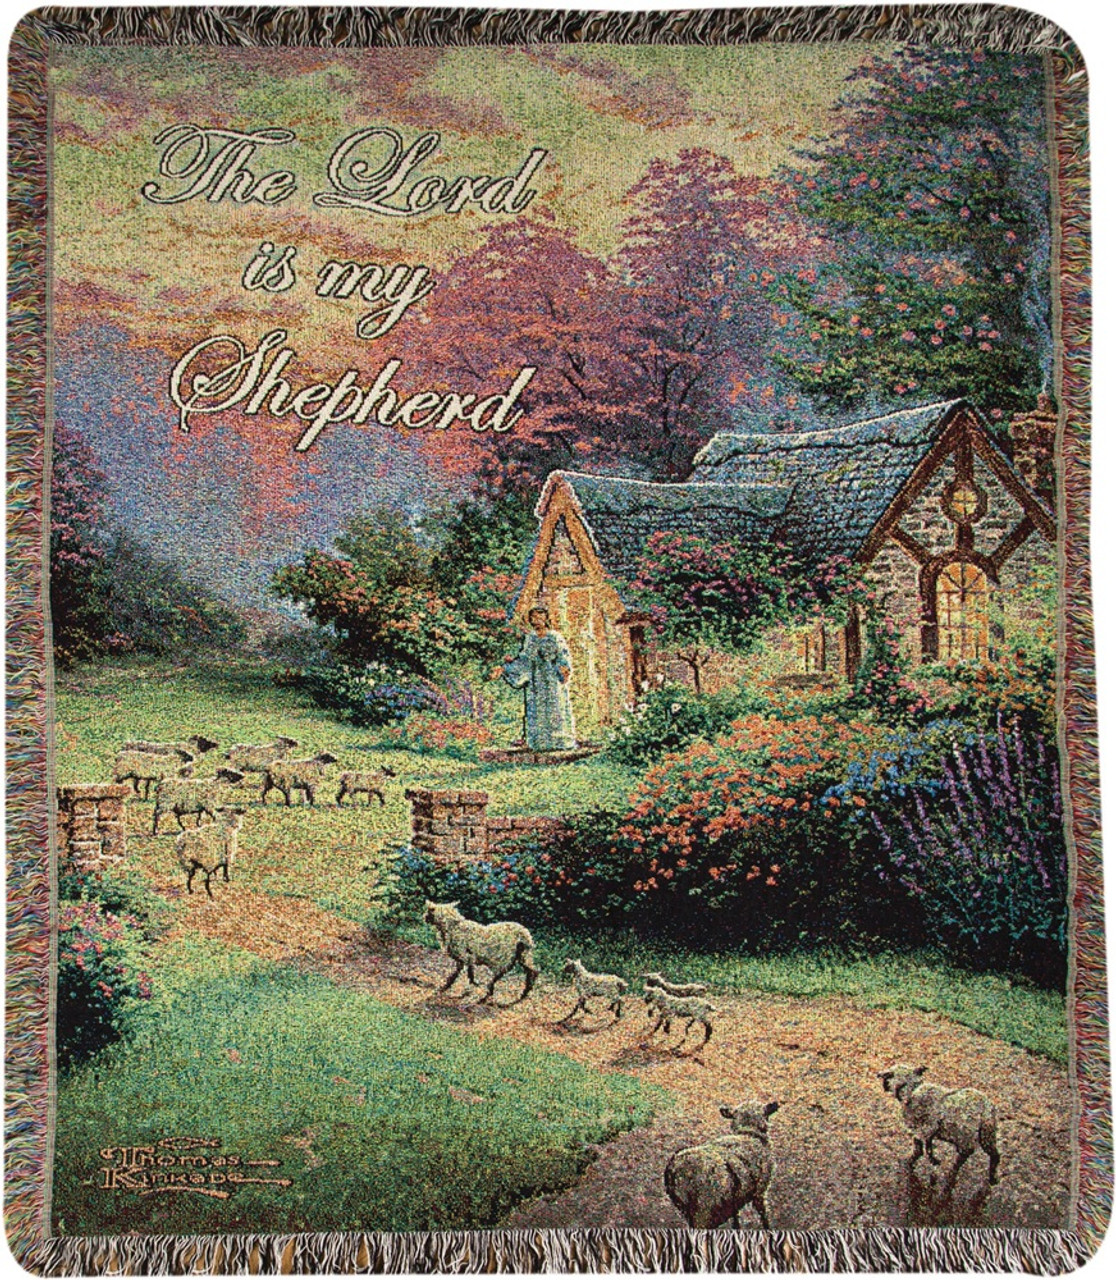 Thomas Kinkade "The Lord Is My Shepherd" Cottage Pictorial Jacquard Woven  Fringed Throw Blanket 50" X 60" Christmas Central